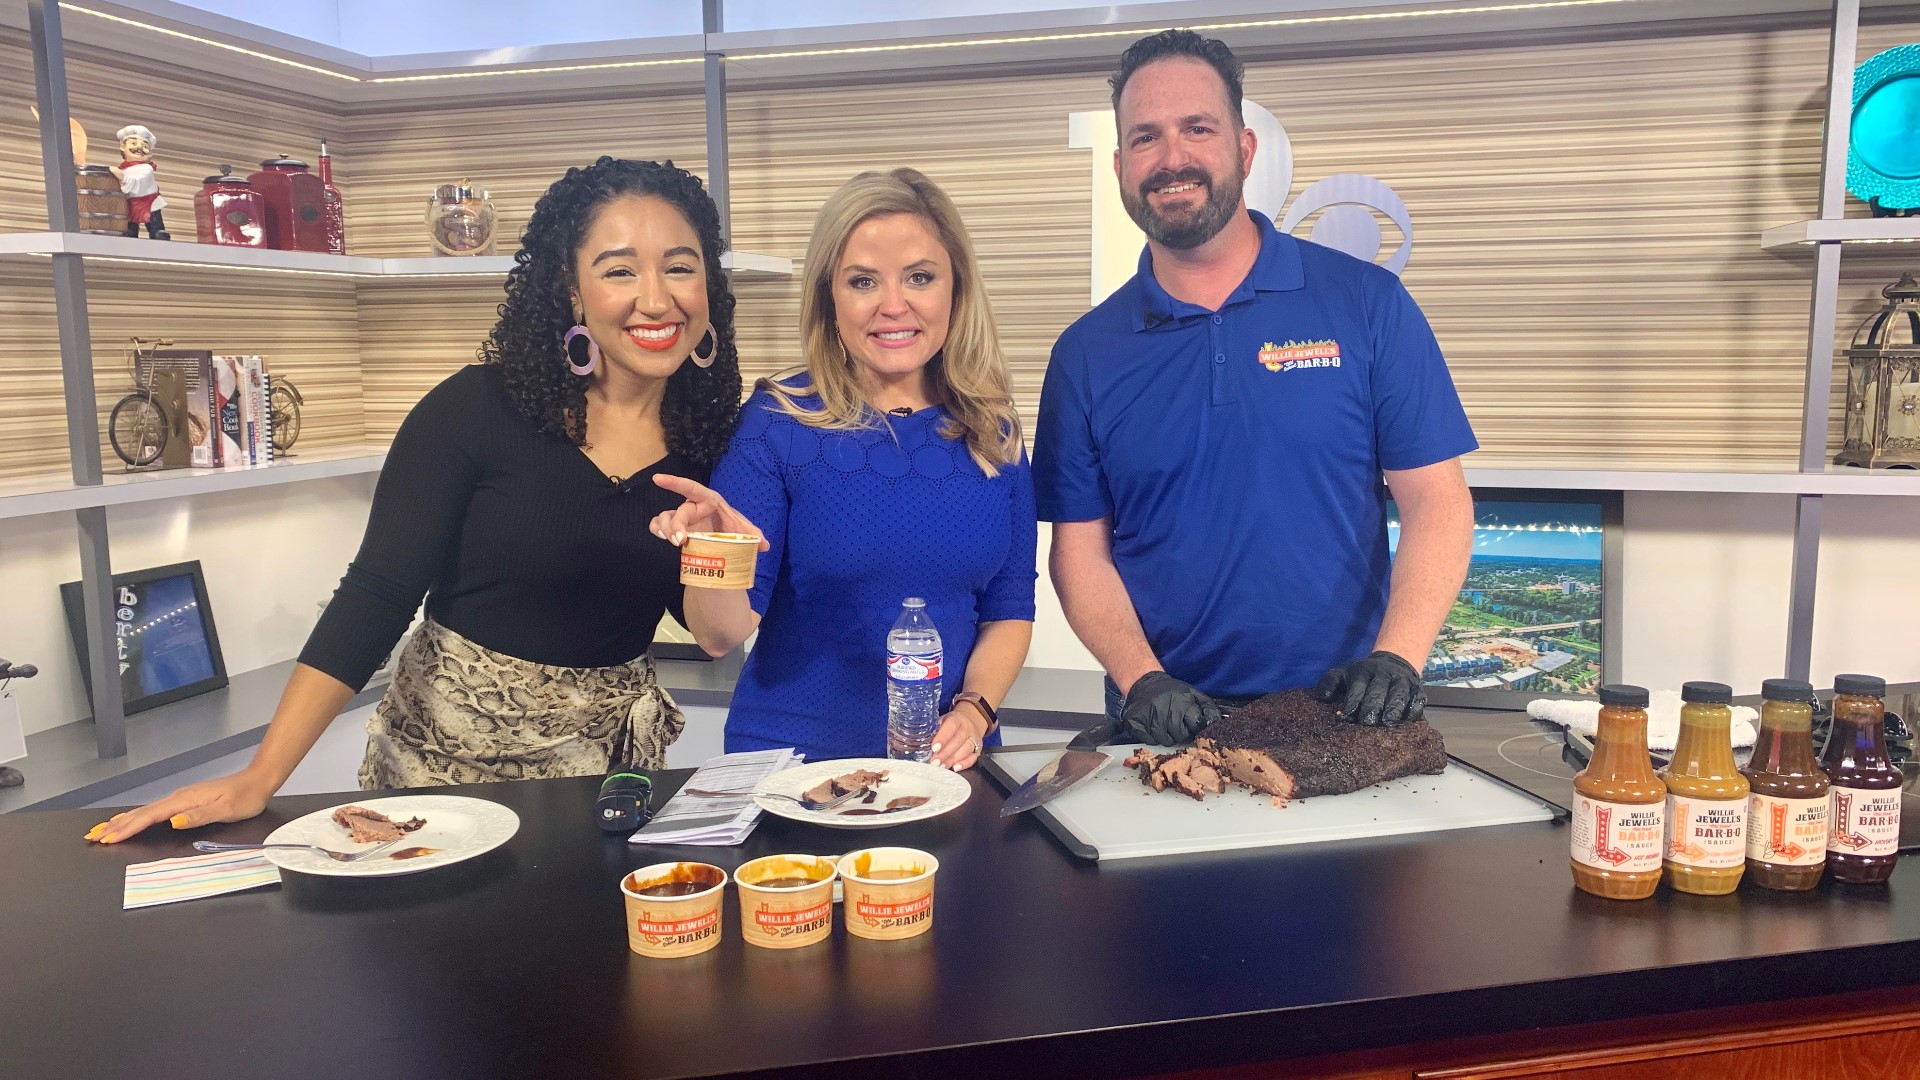 Willie Jewell's Bar-B-Q joins Andrea and Whitney as they try slow-cooked brisket that was smoked for 12 hours along with home-made sauces.